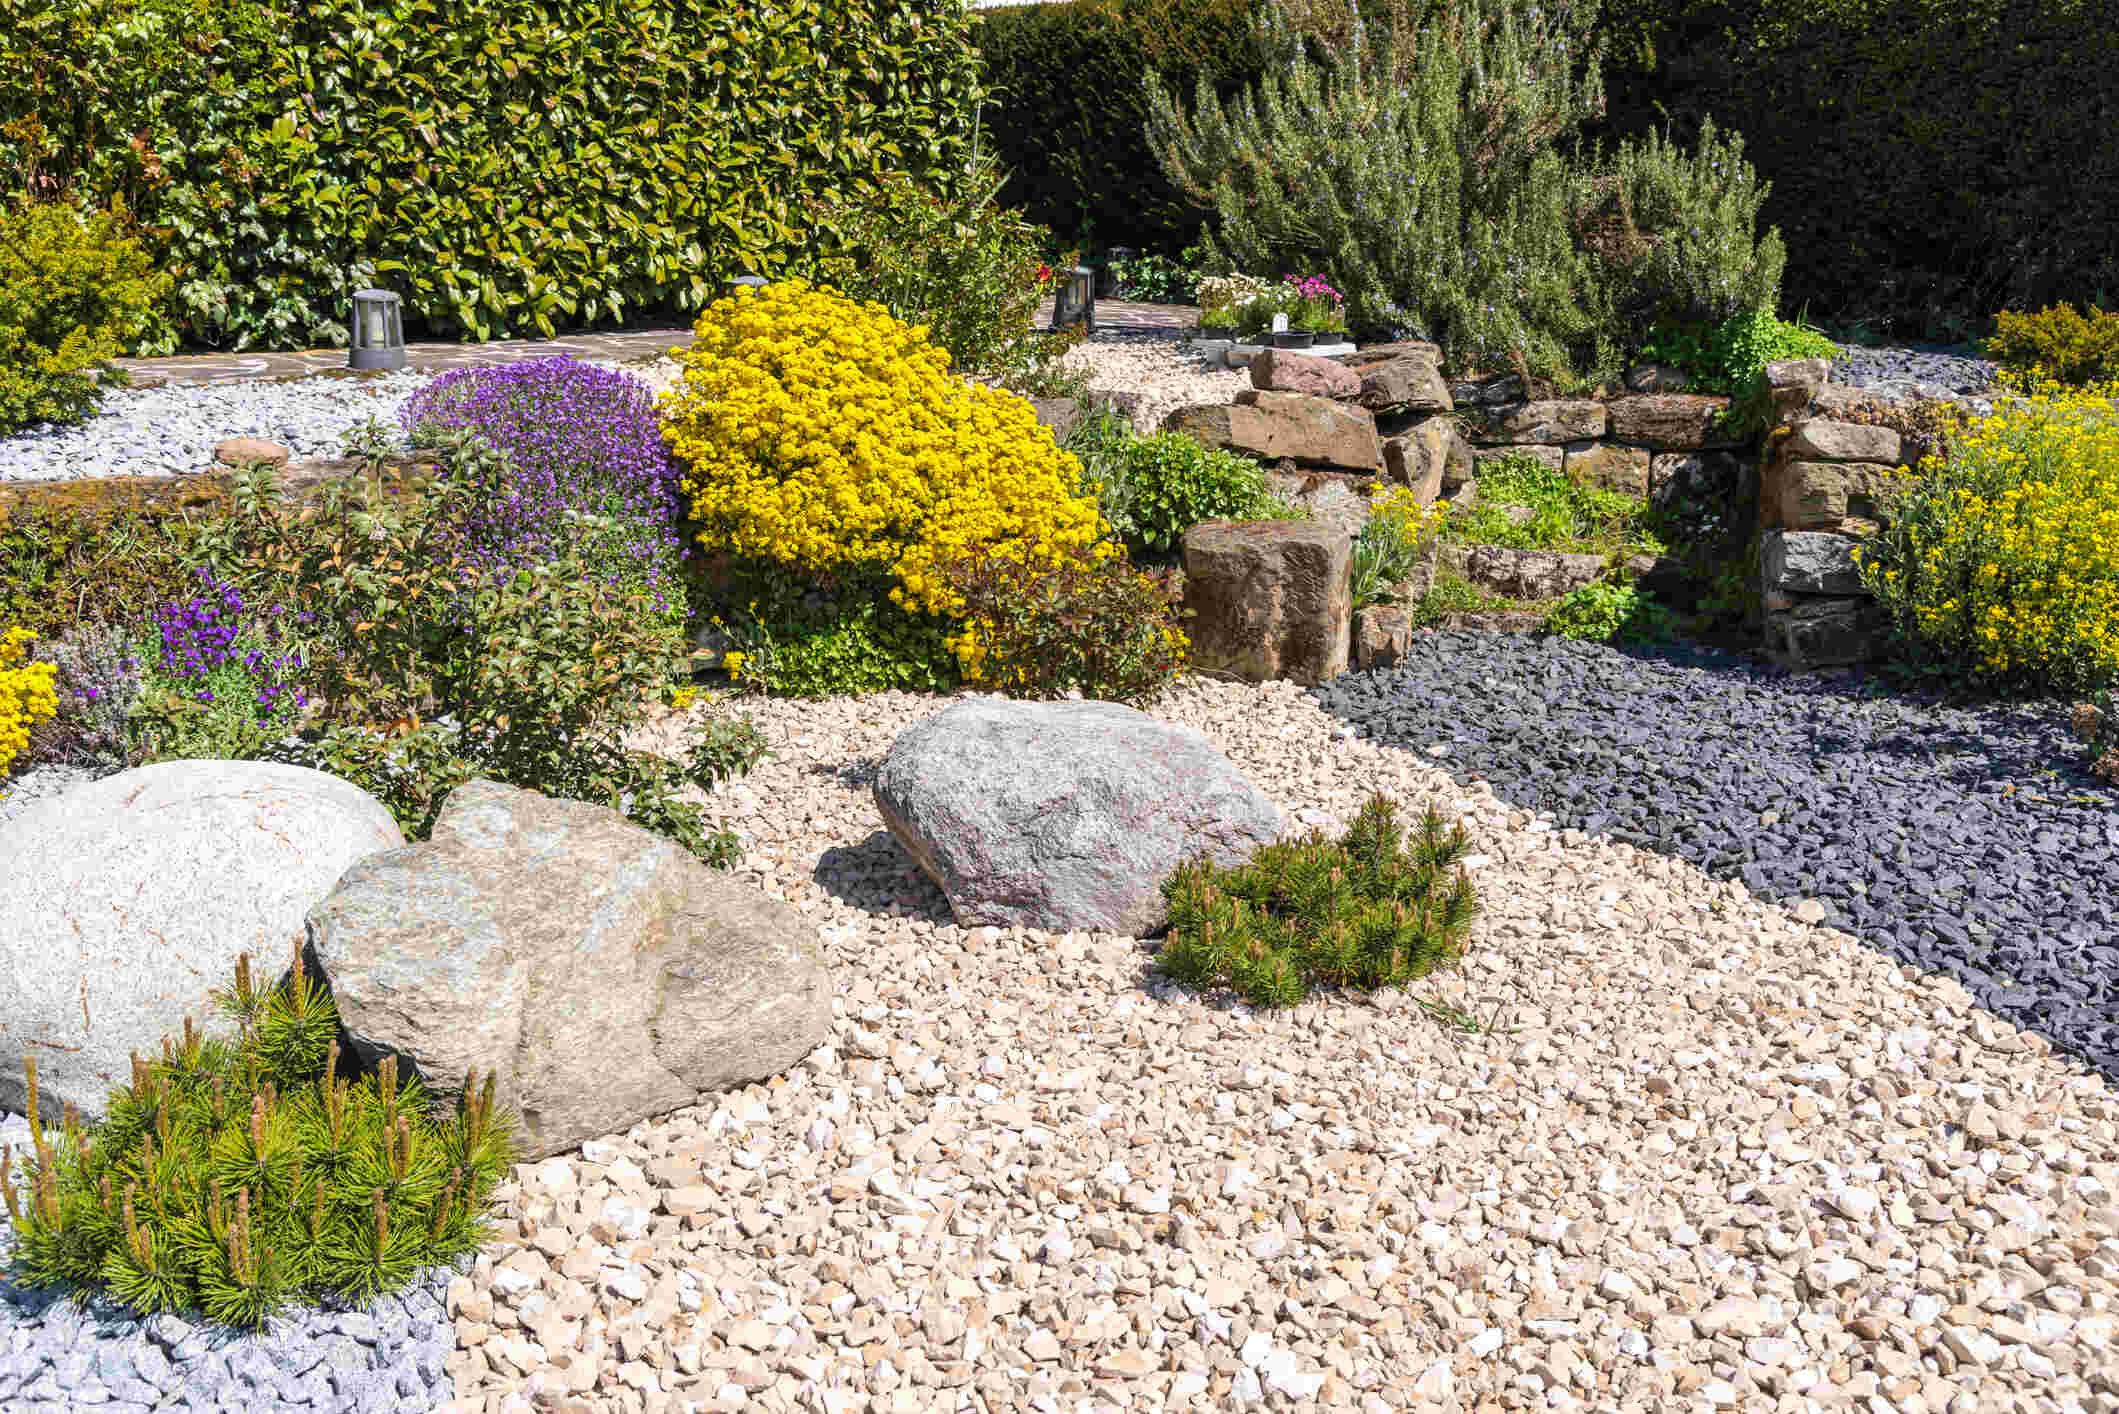 Where Can I Buy Landscaping Rocks